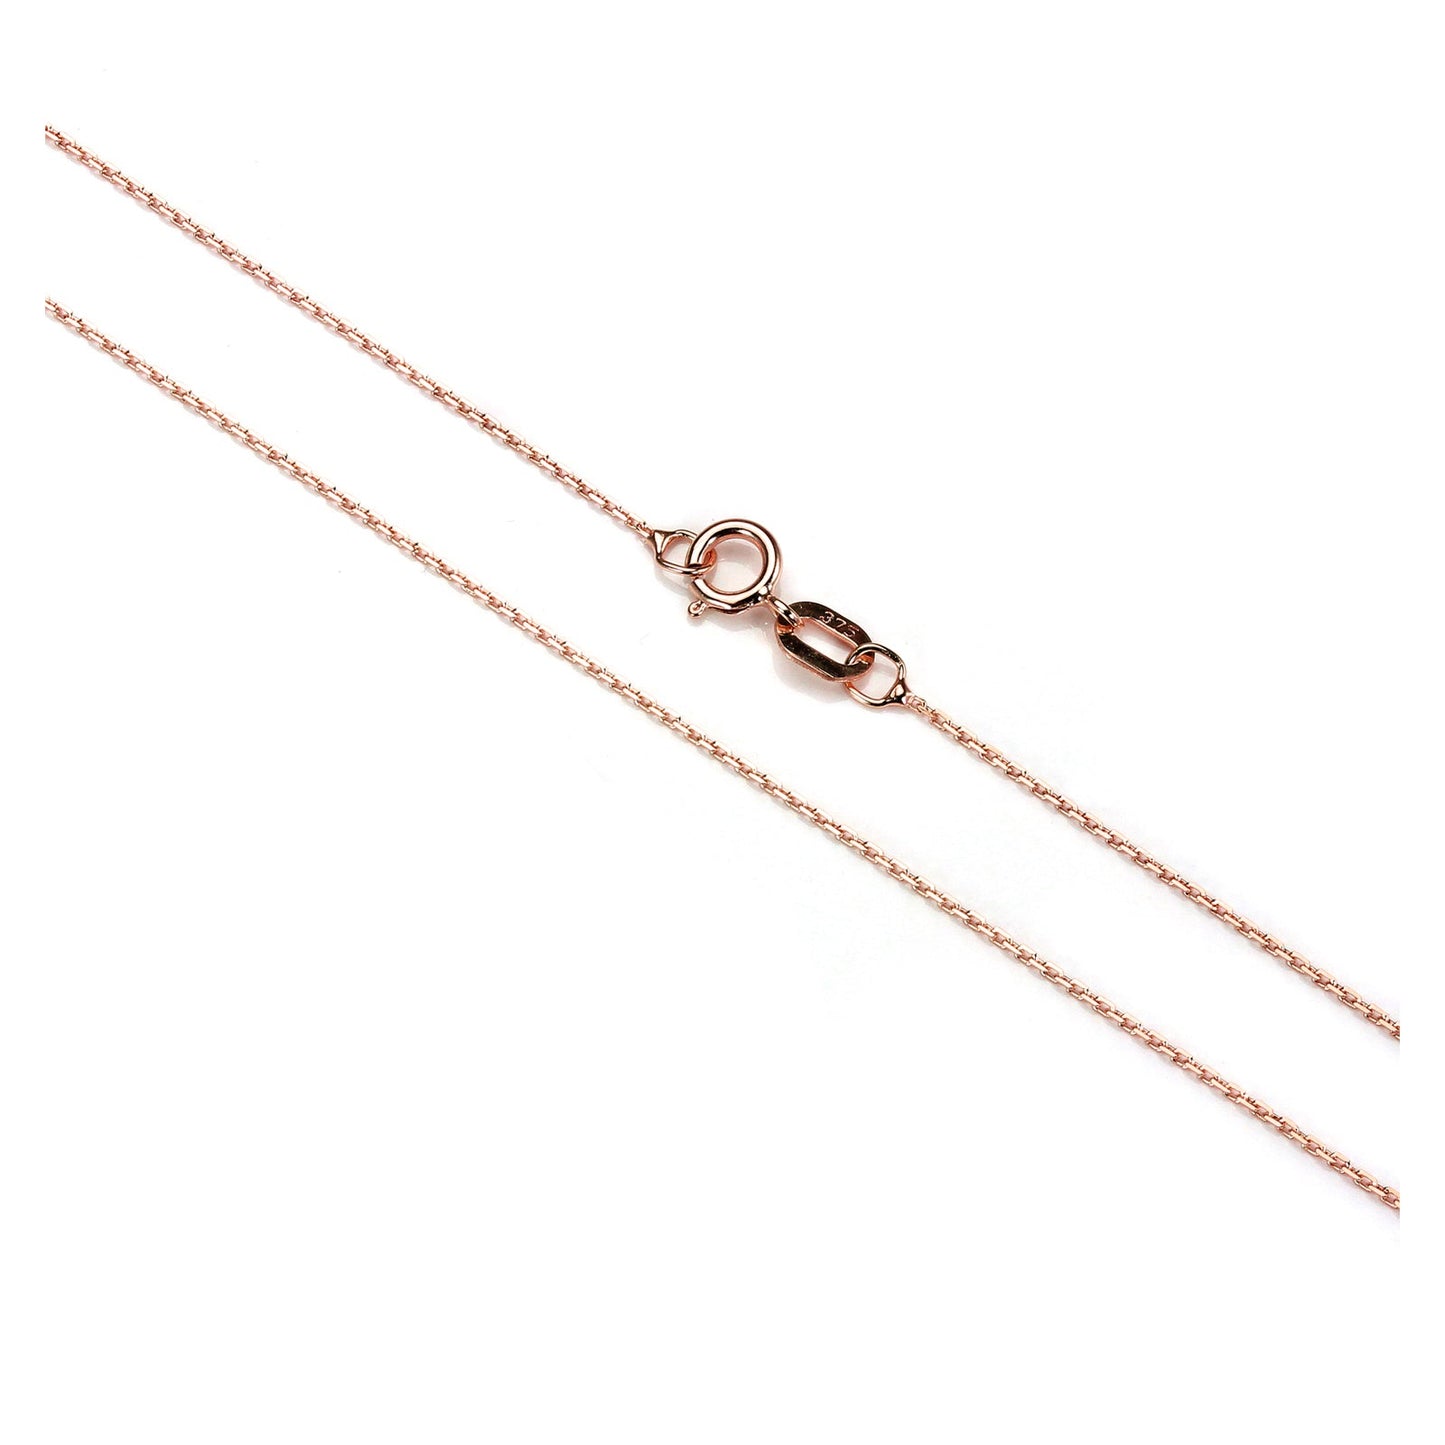 Light 9ct Rose Gold Belcher Chain 16 - 20 Inches